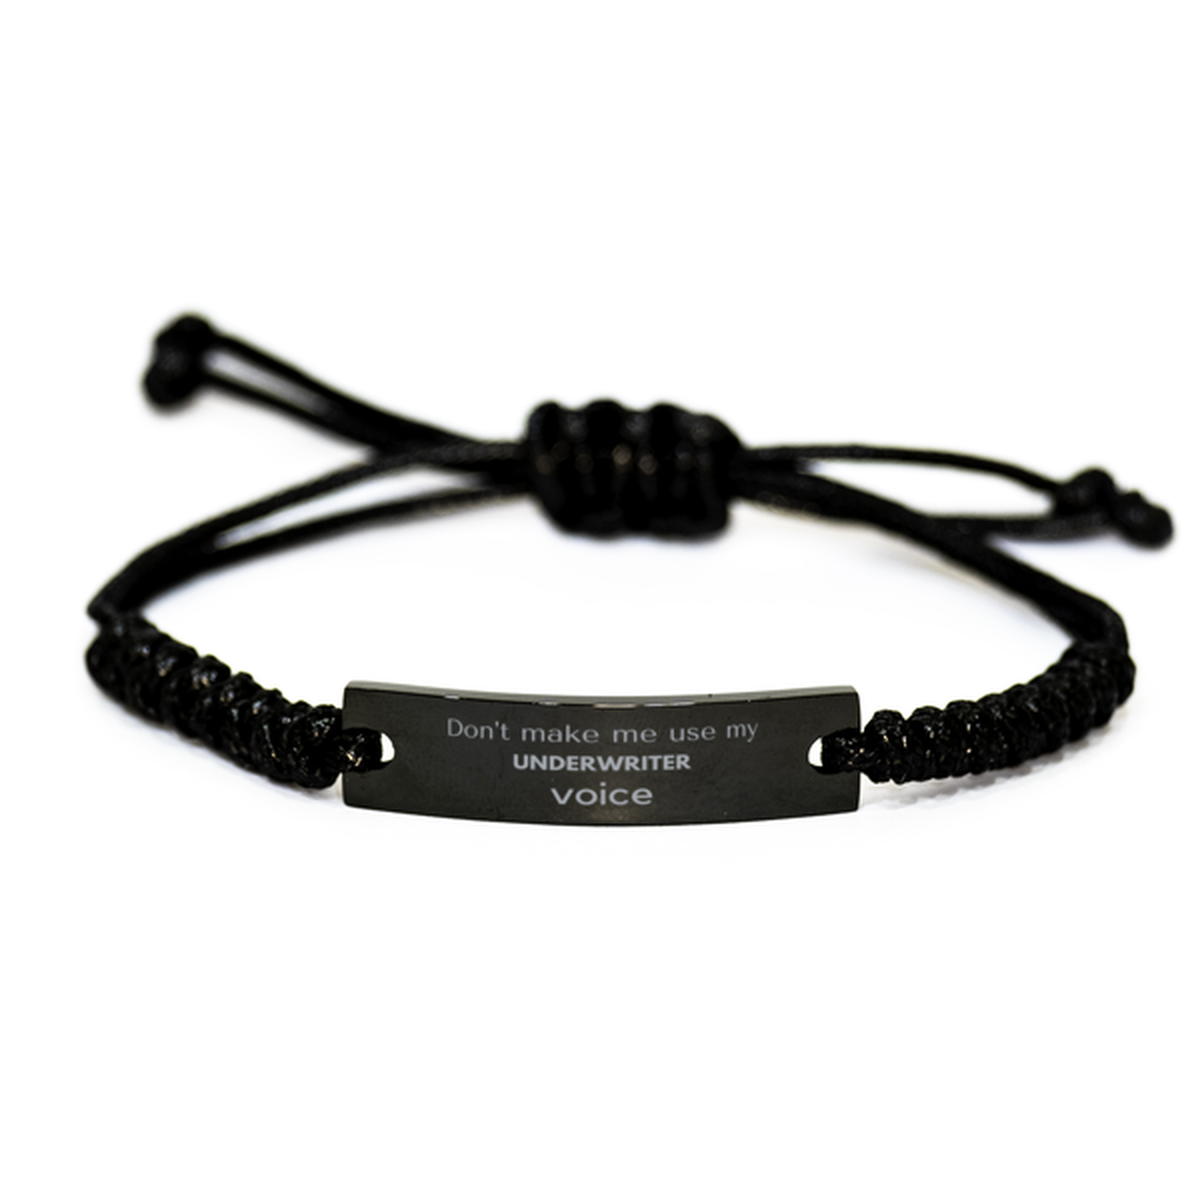 Don't make me use my Underwriter voice, Sarcasm Underwriter Gifts, Christmas Underwriter Black Rope Bracelet Birthday Unique Gifts For Underwriter Coworkers, Men, Women, Colleague, Friends